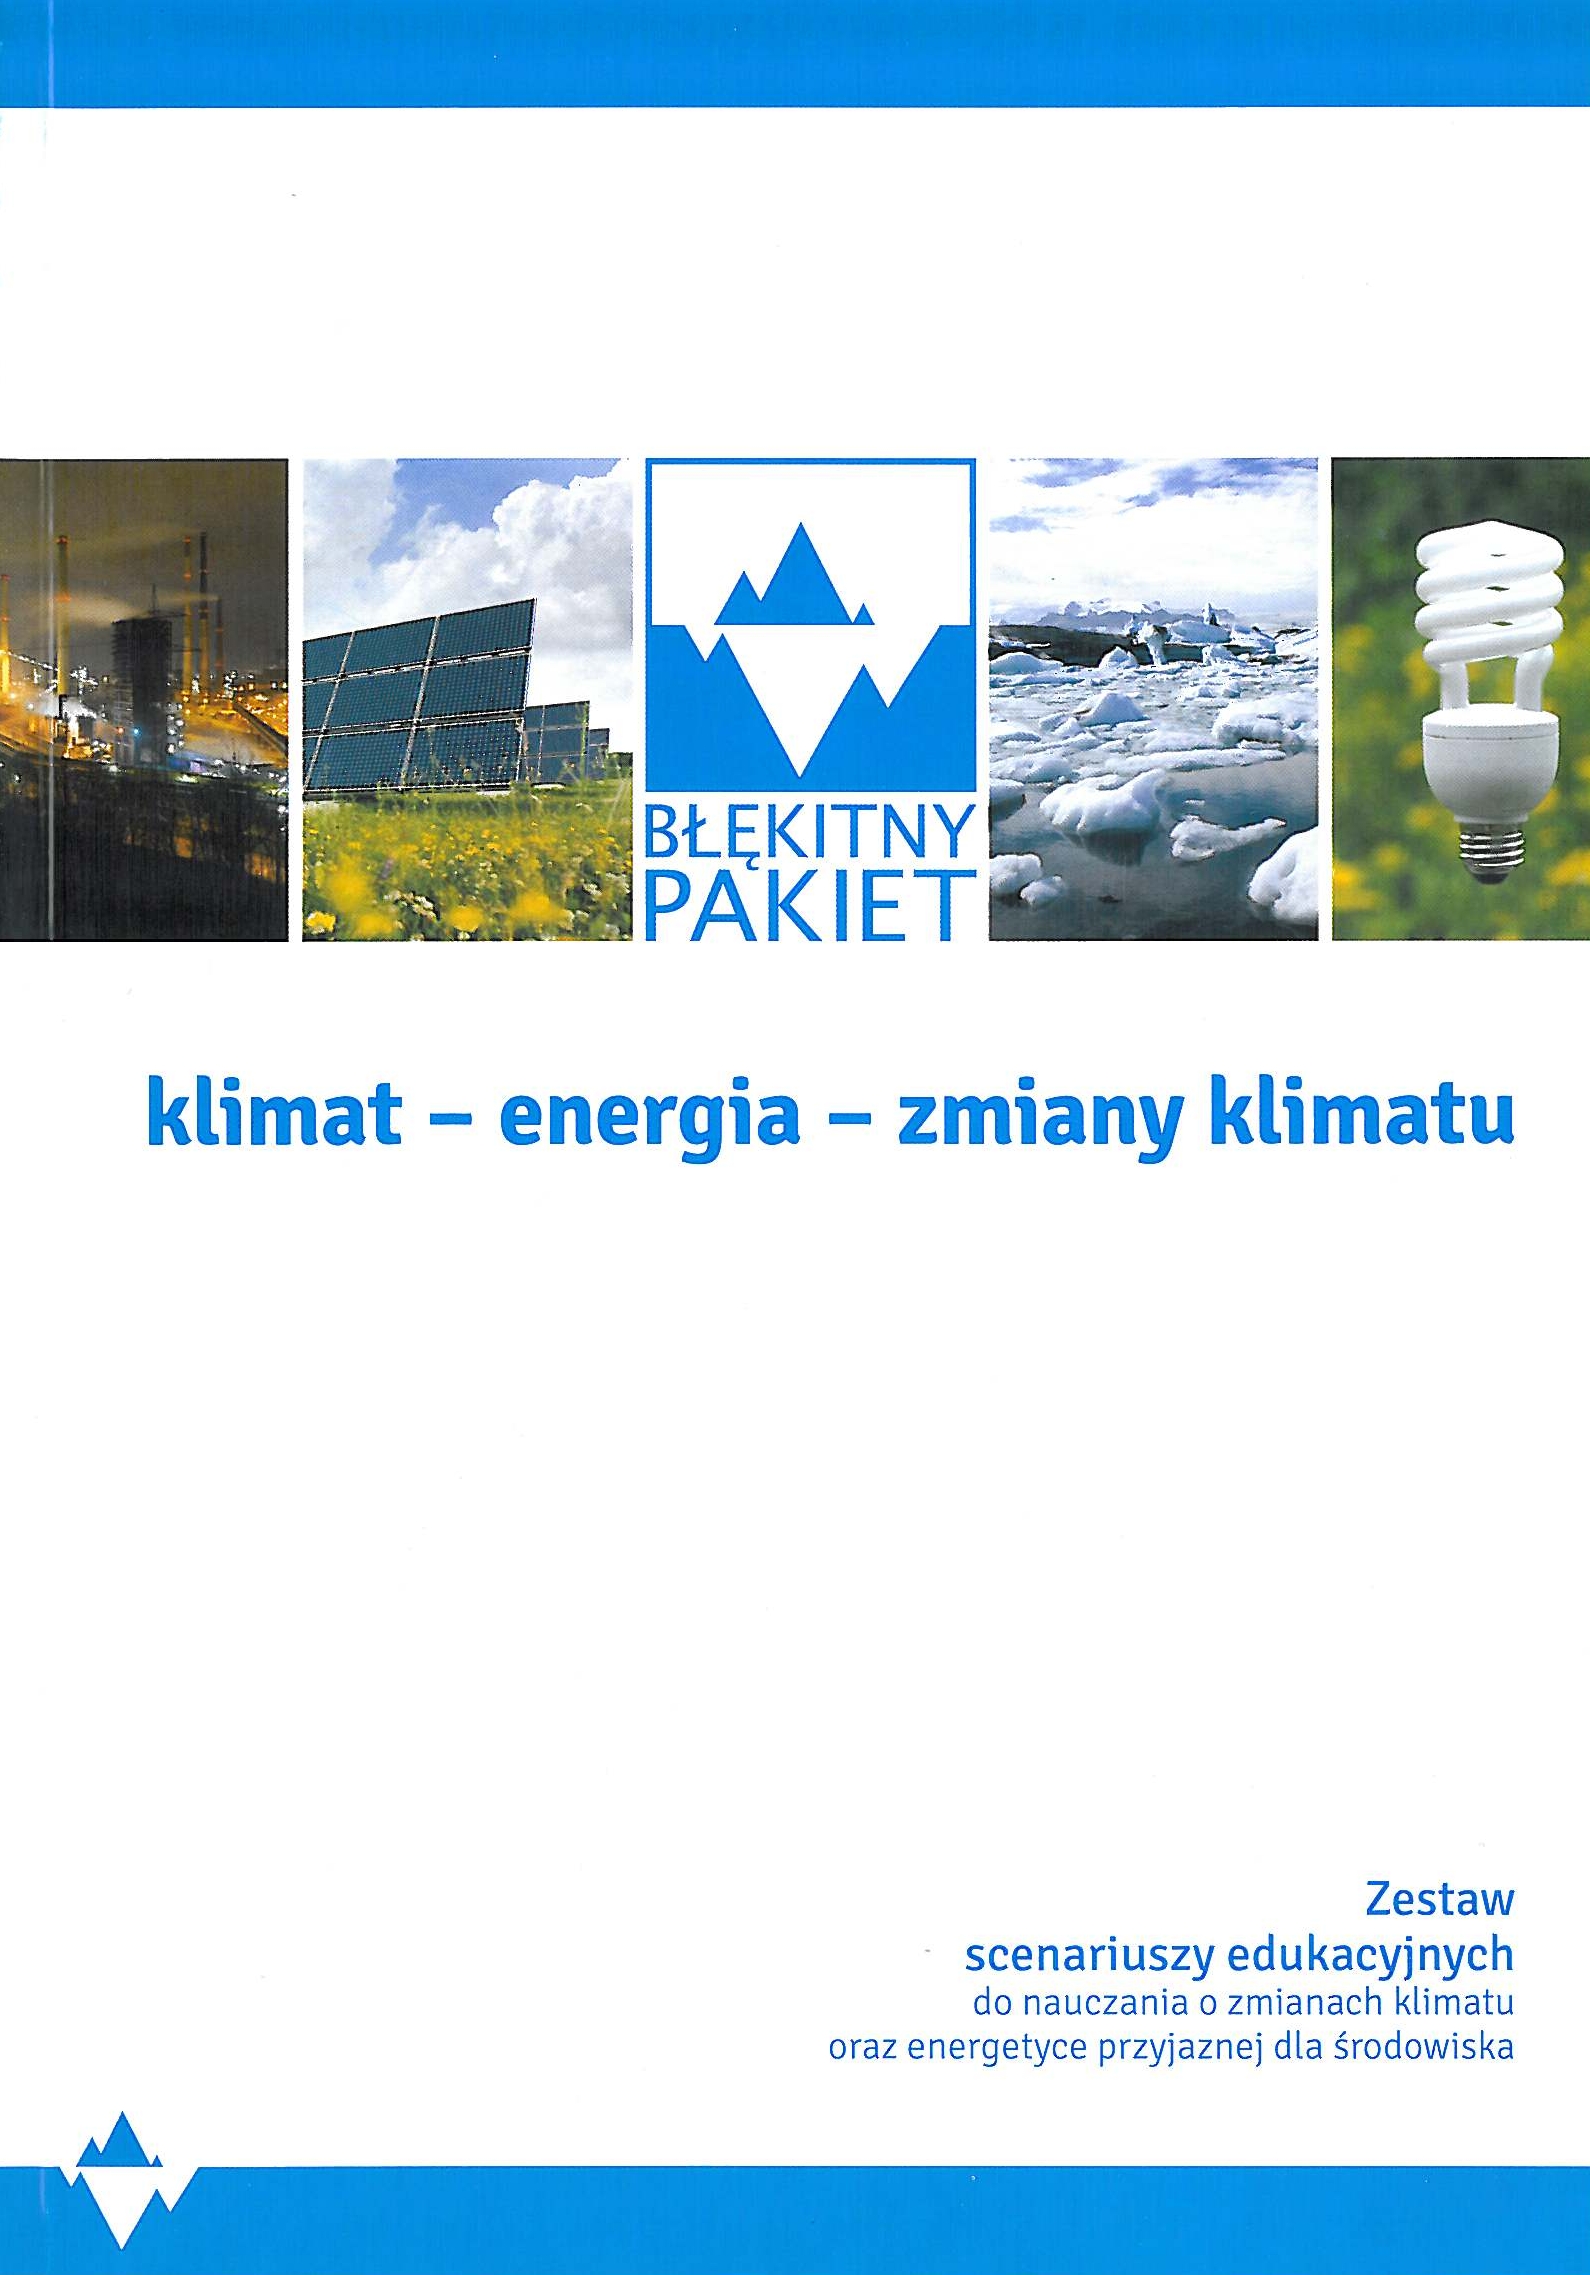 Blue pack. Climate – energy – climate changes